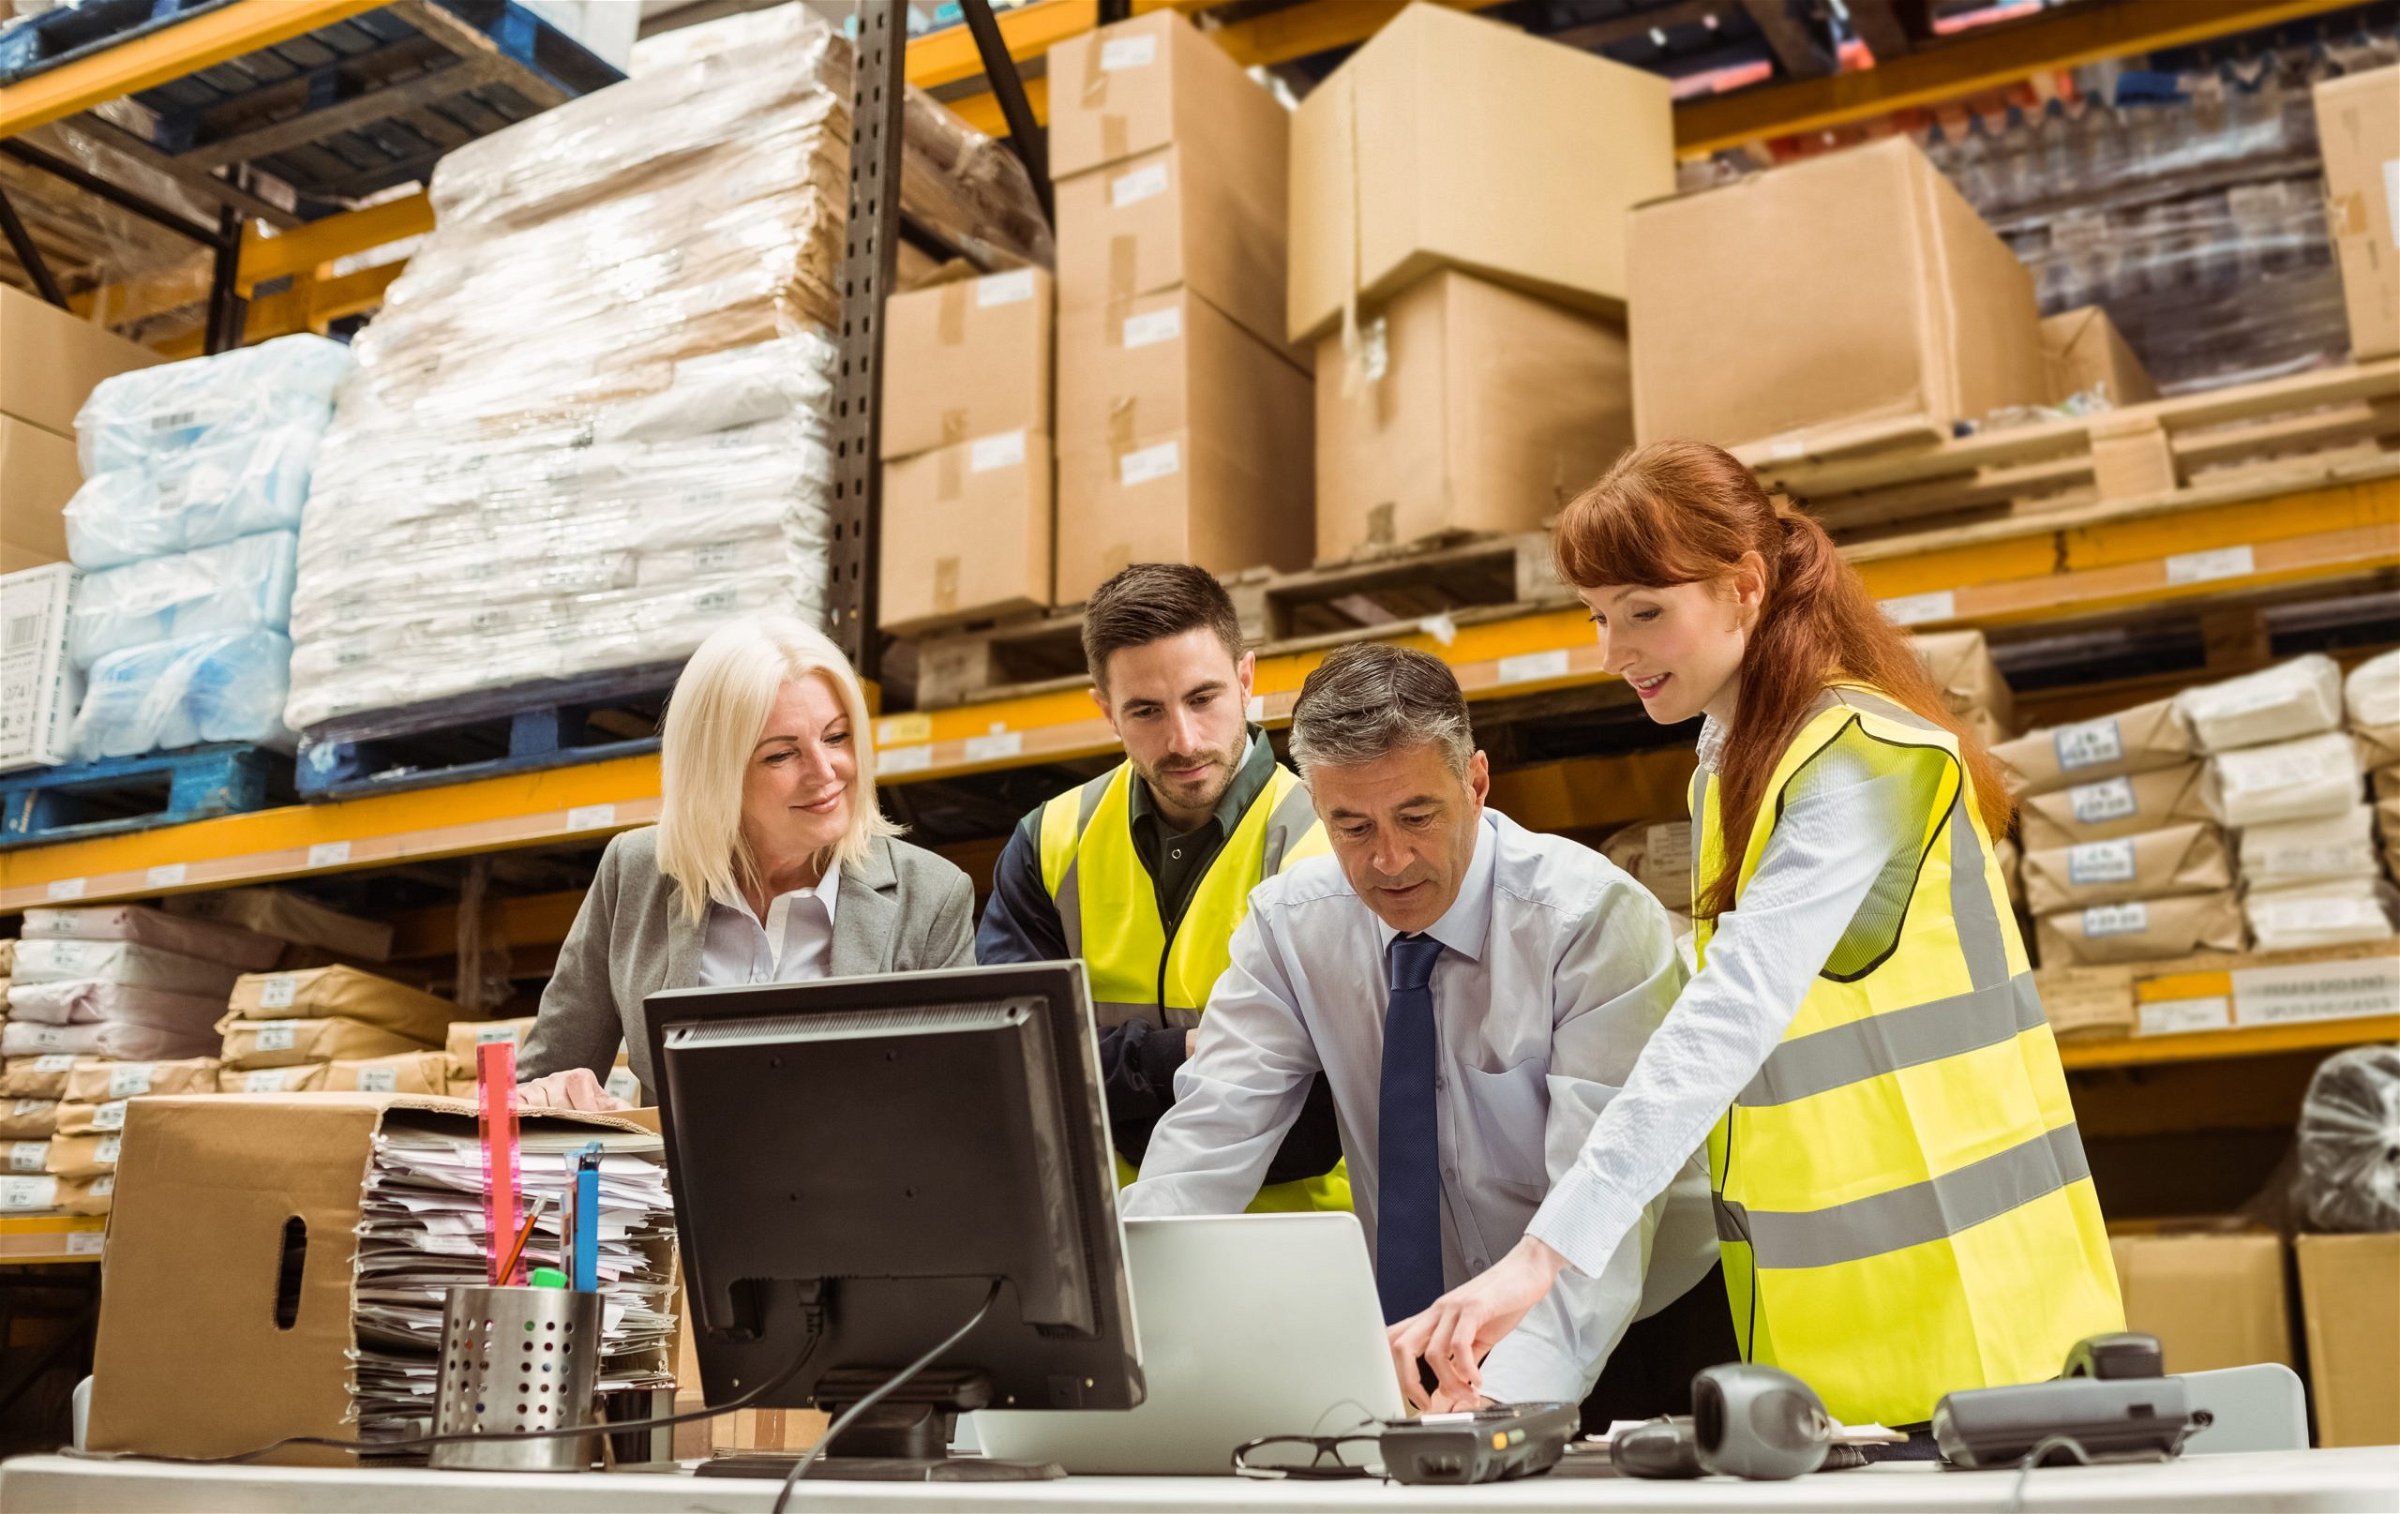 7 reasons why you must technologize supply chain using advanced analytics and AI